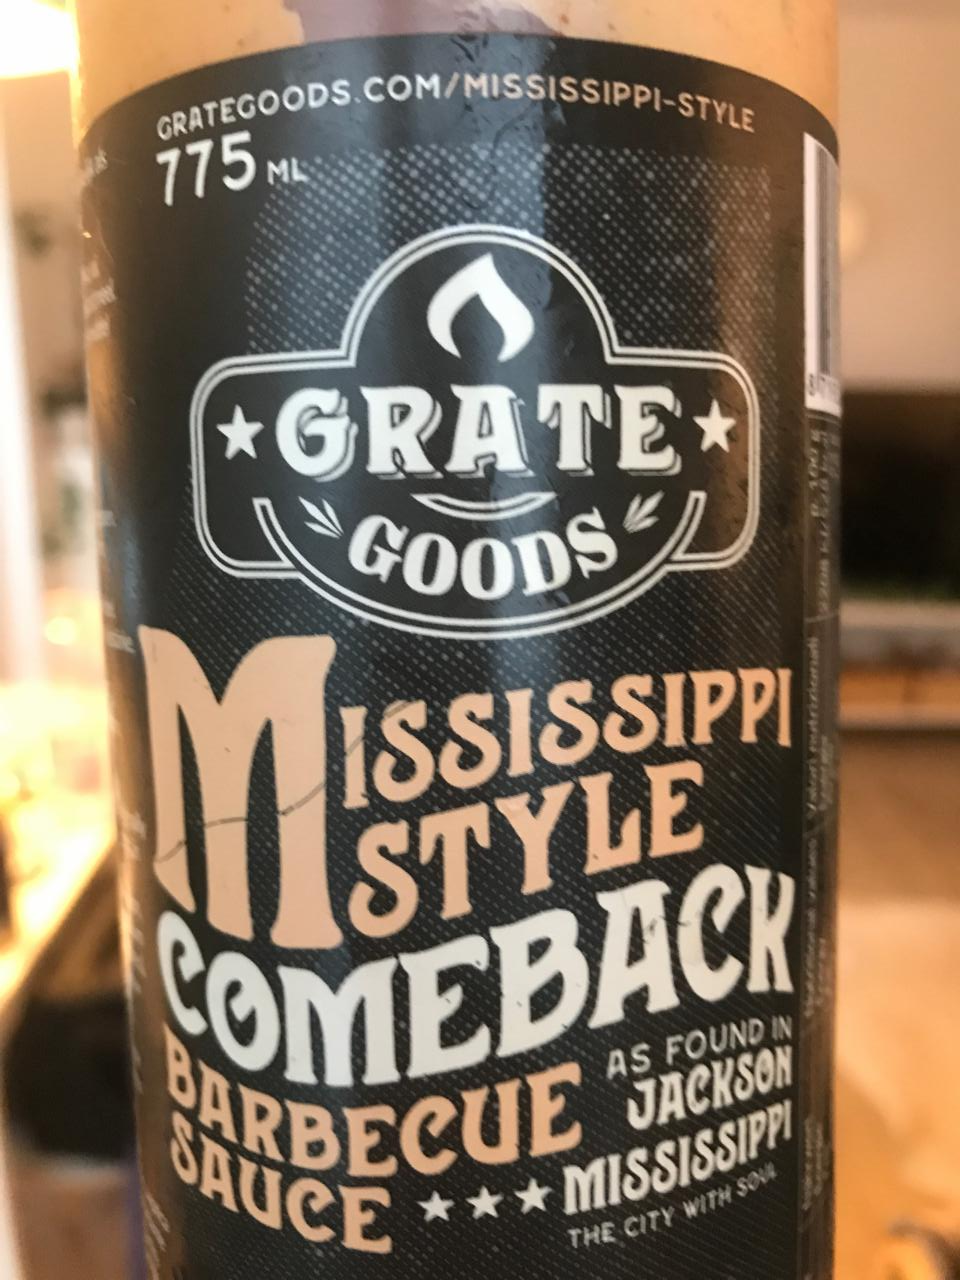 Fotografie - Mississippi Style Comeback Barbecue Sauce Grate Goods